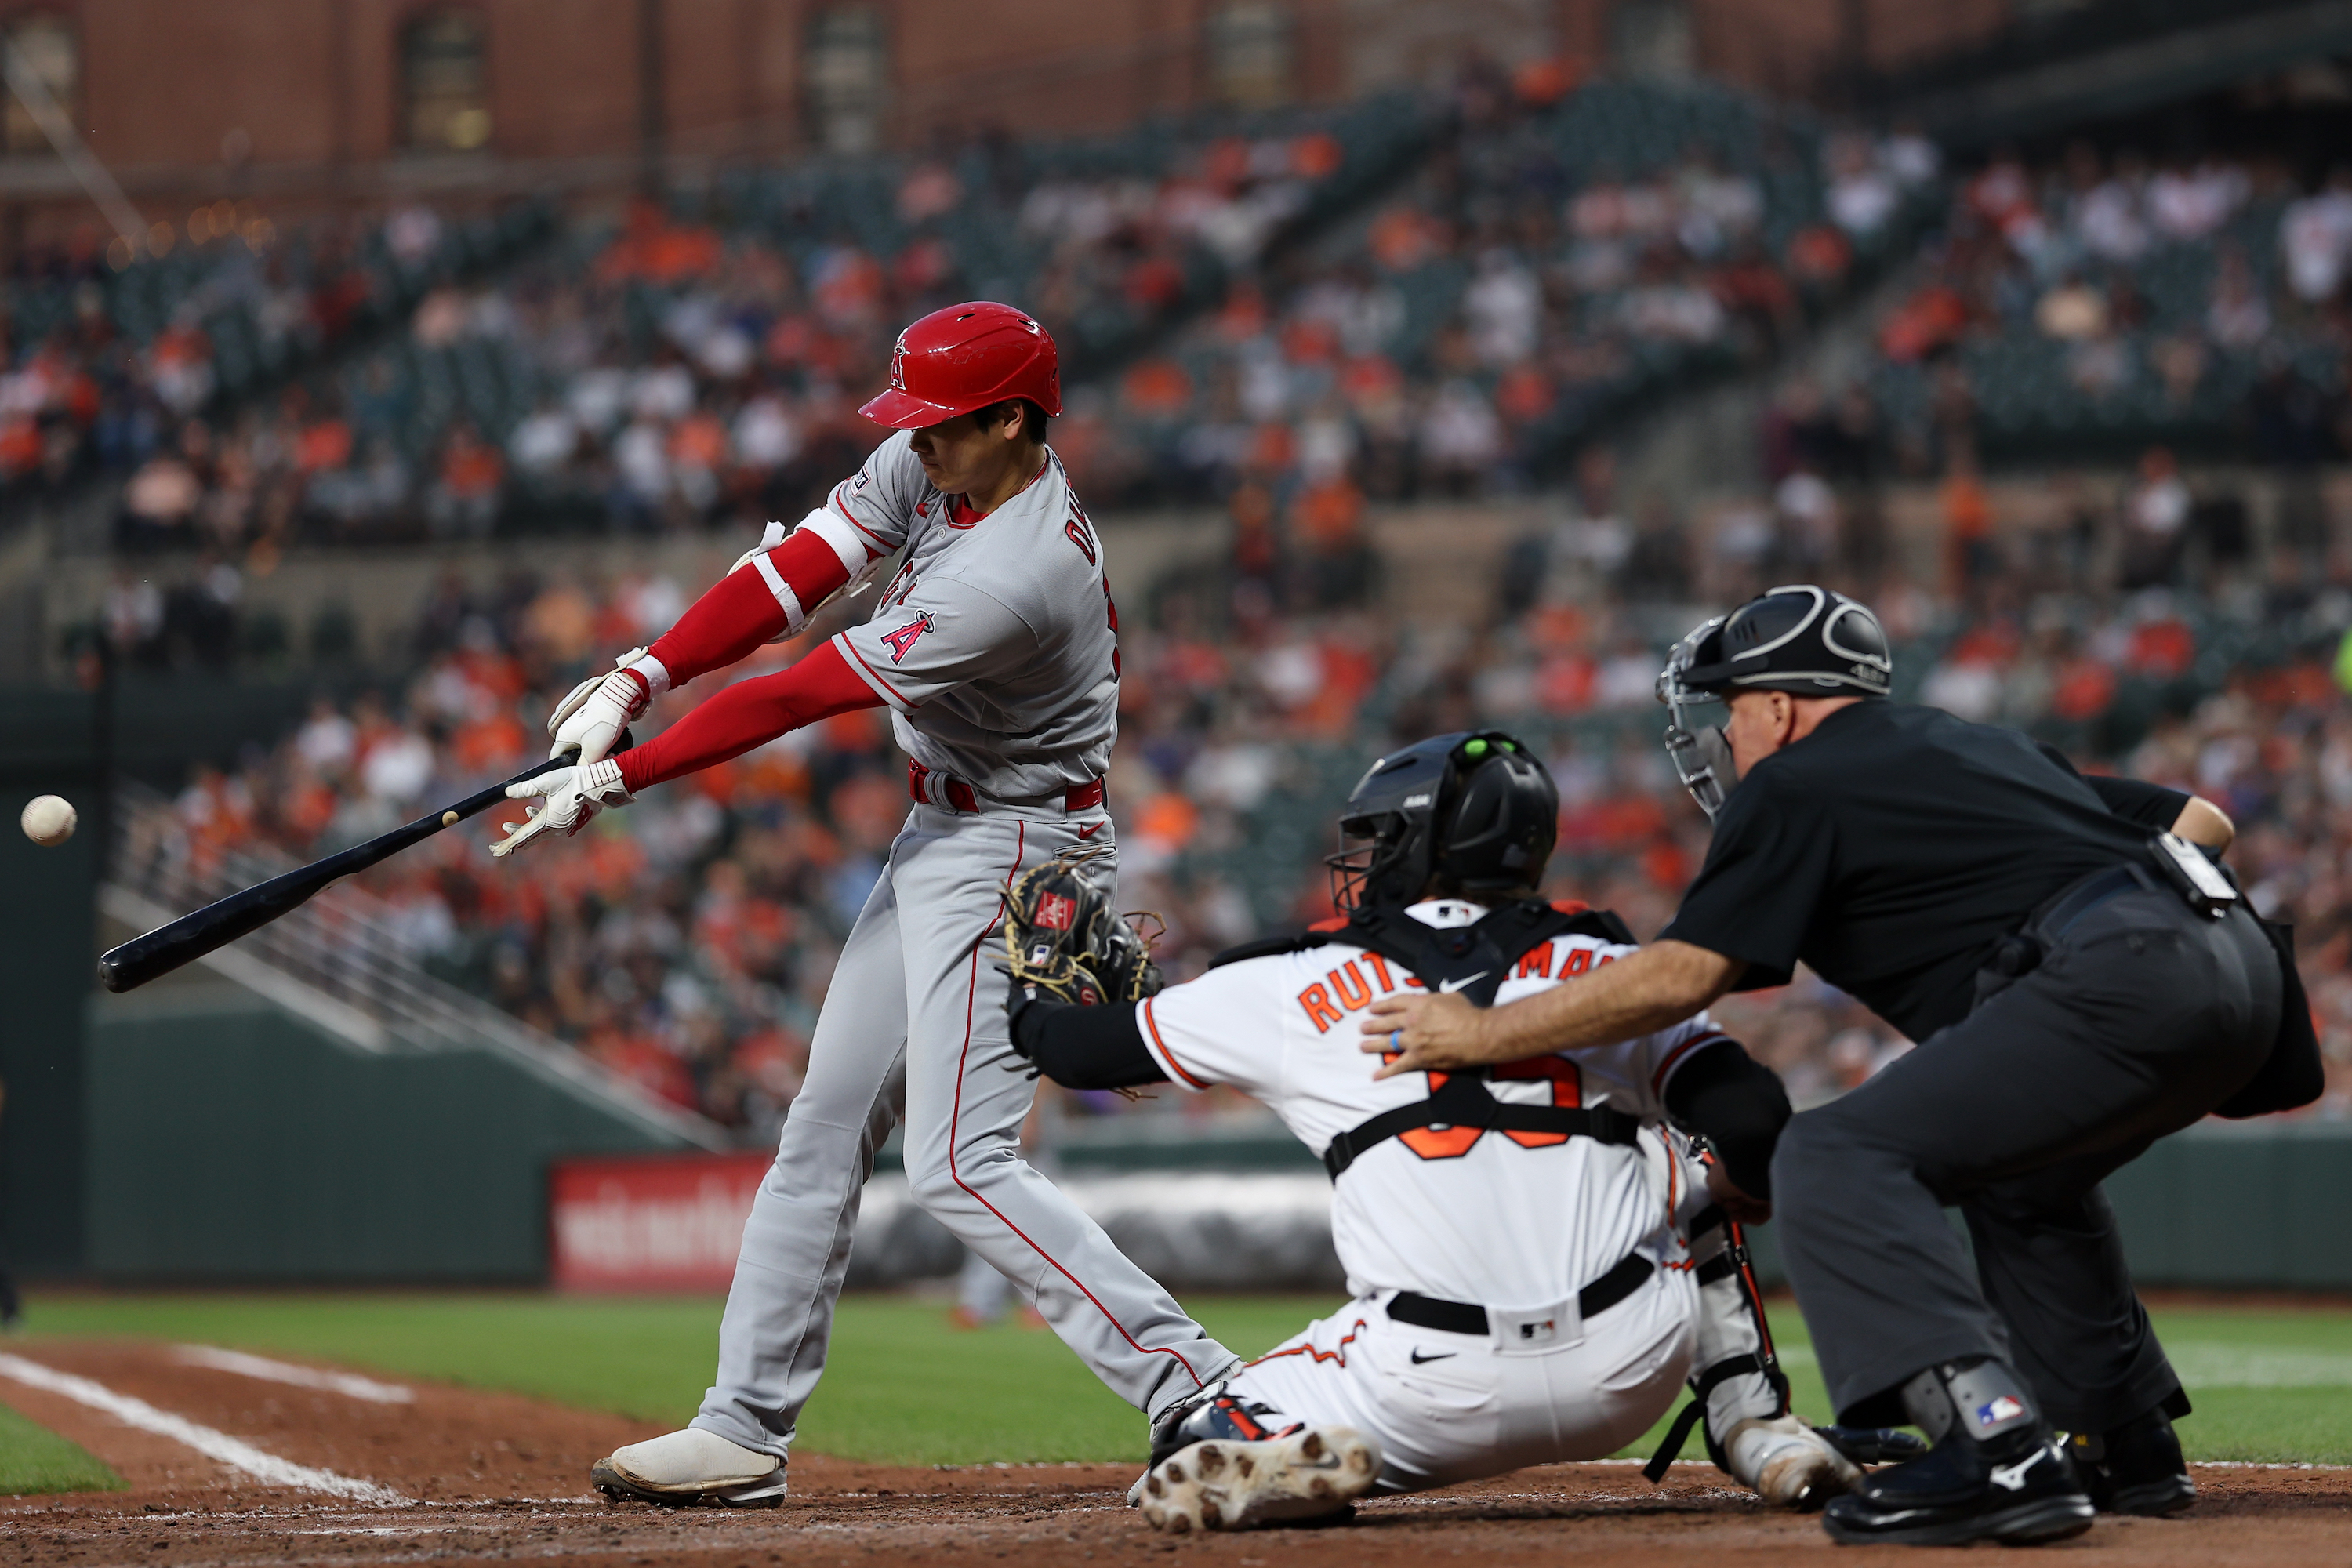 Ohtani pitches 7 innings, reaches base 5 times as Angels beat Orioles 9-5